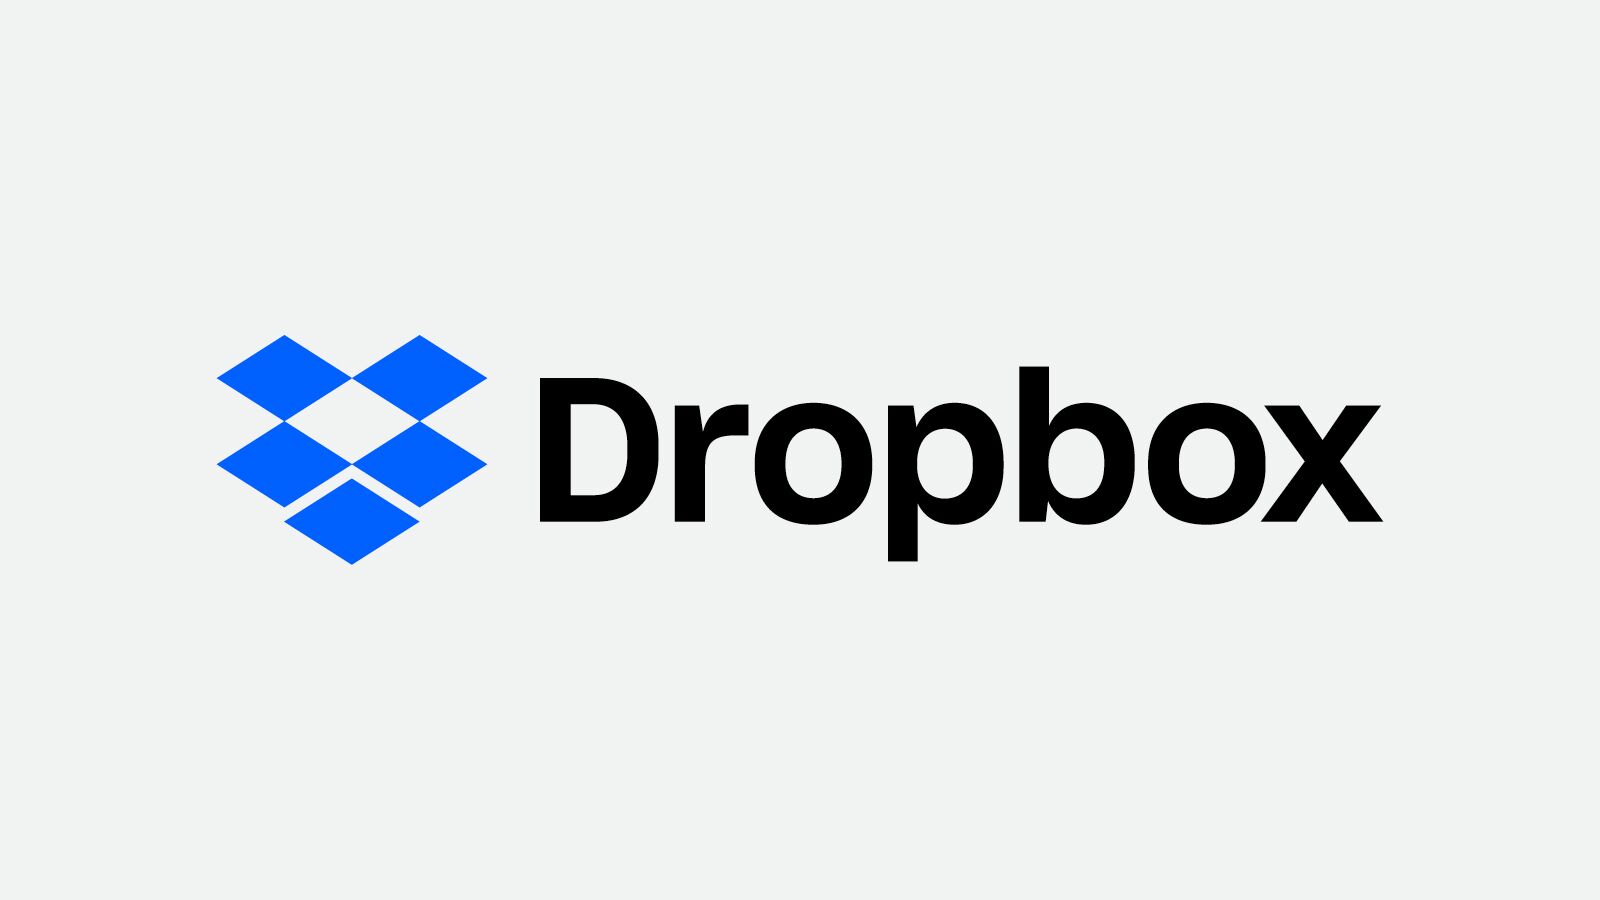 Lots of new features for Dropbox, including end-to-end encryption for Teams.